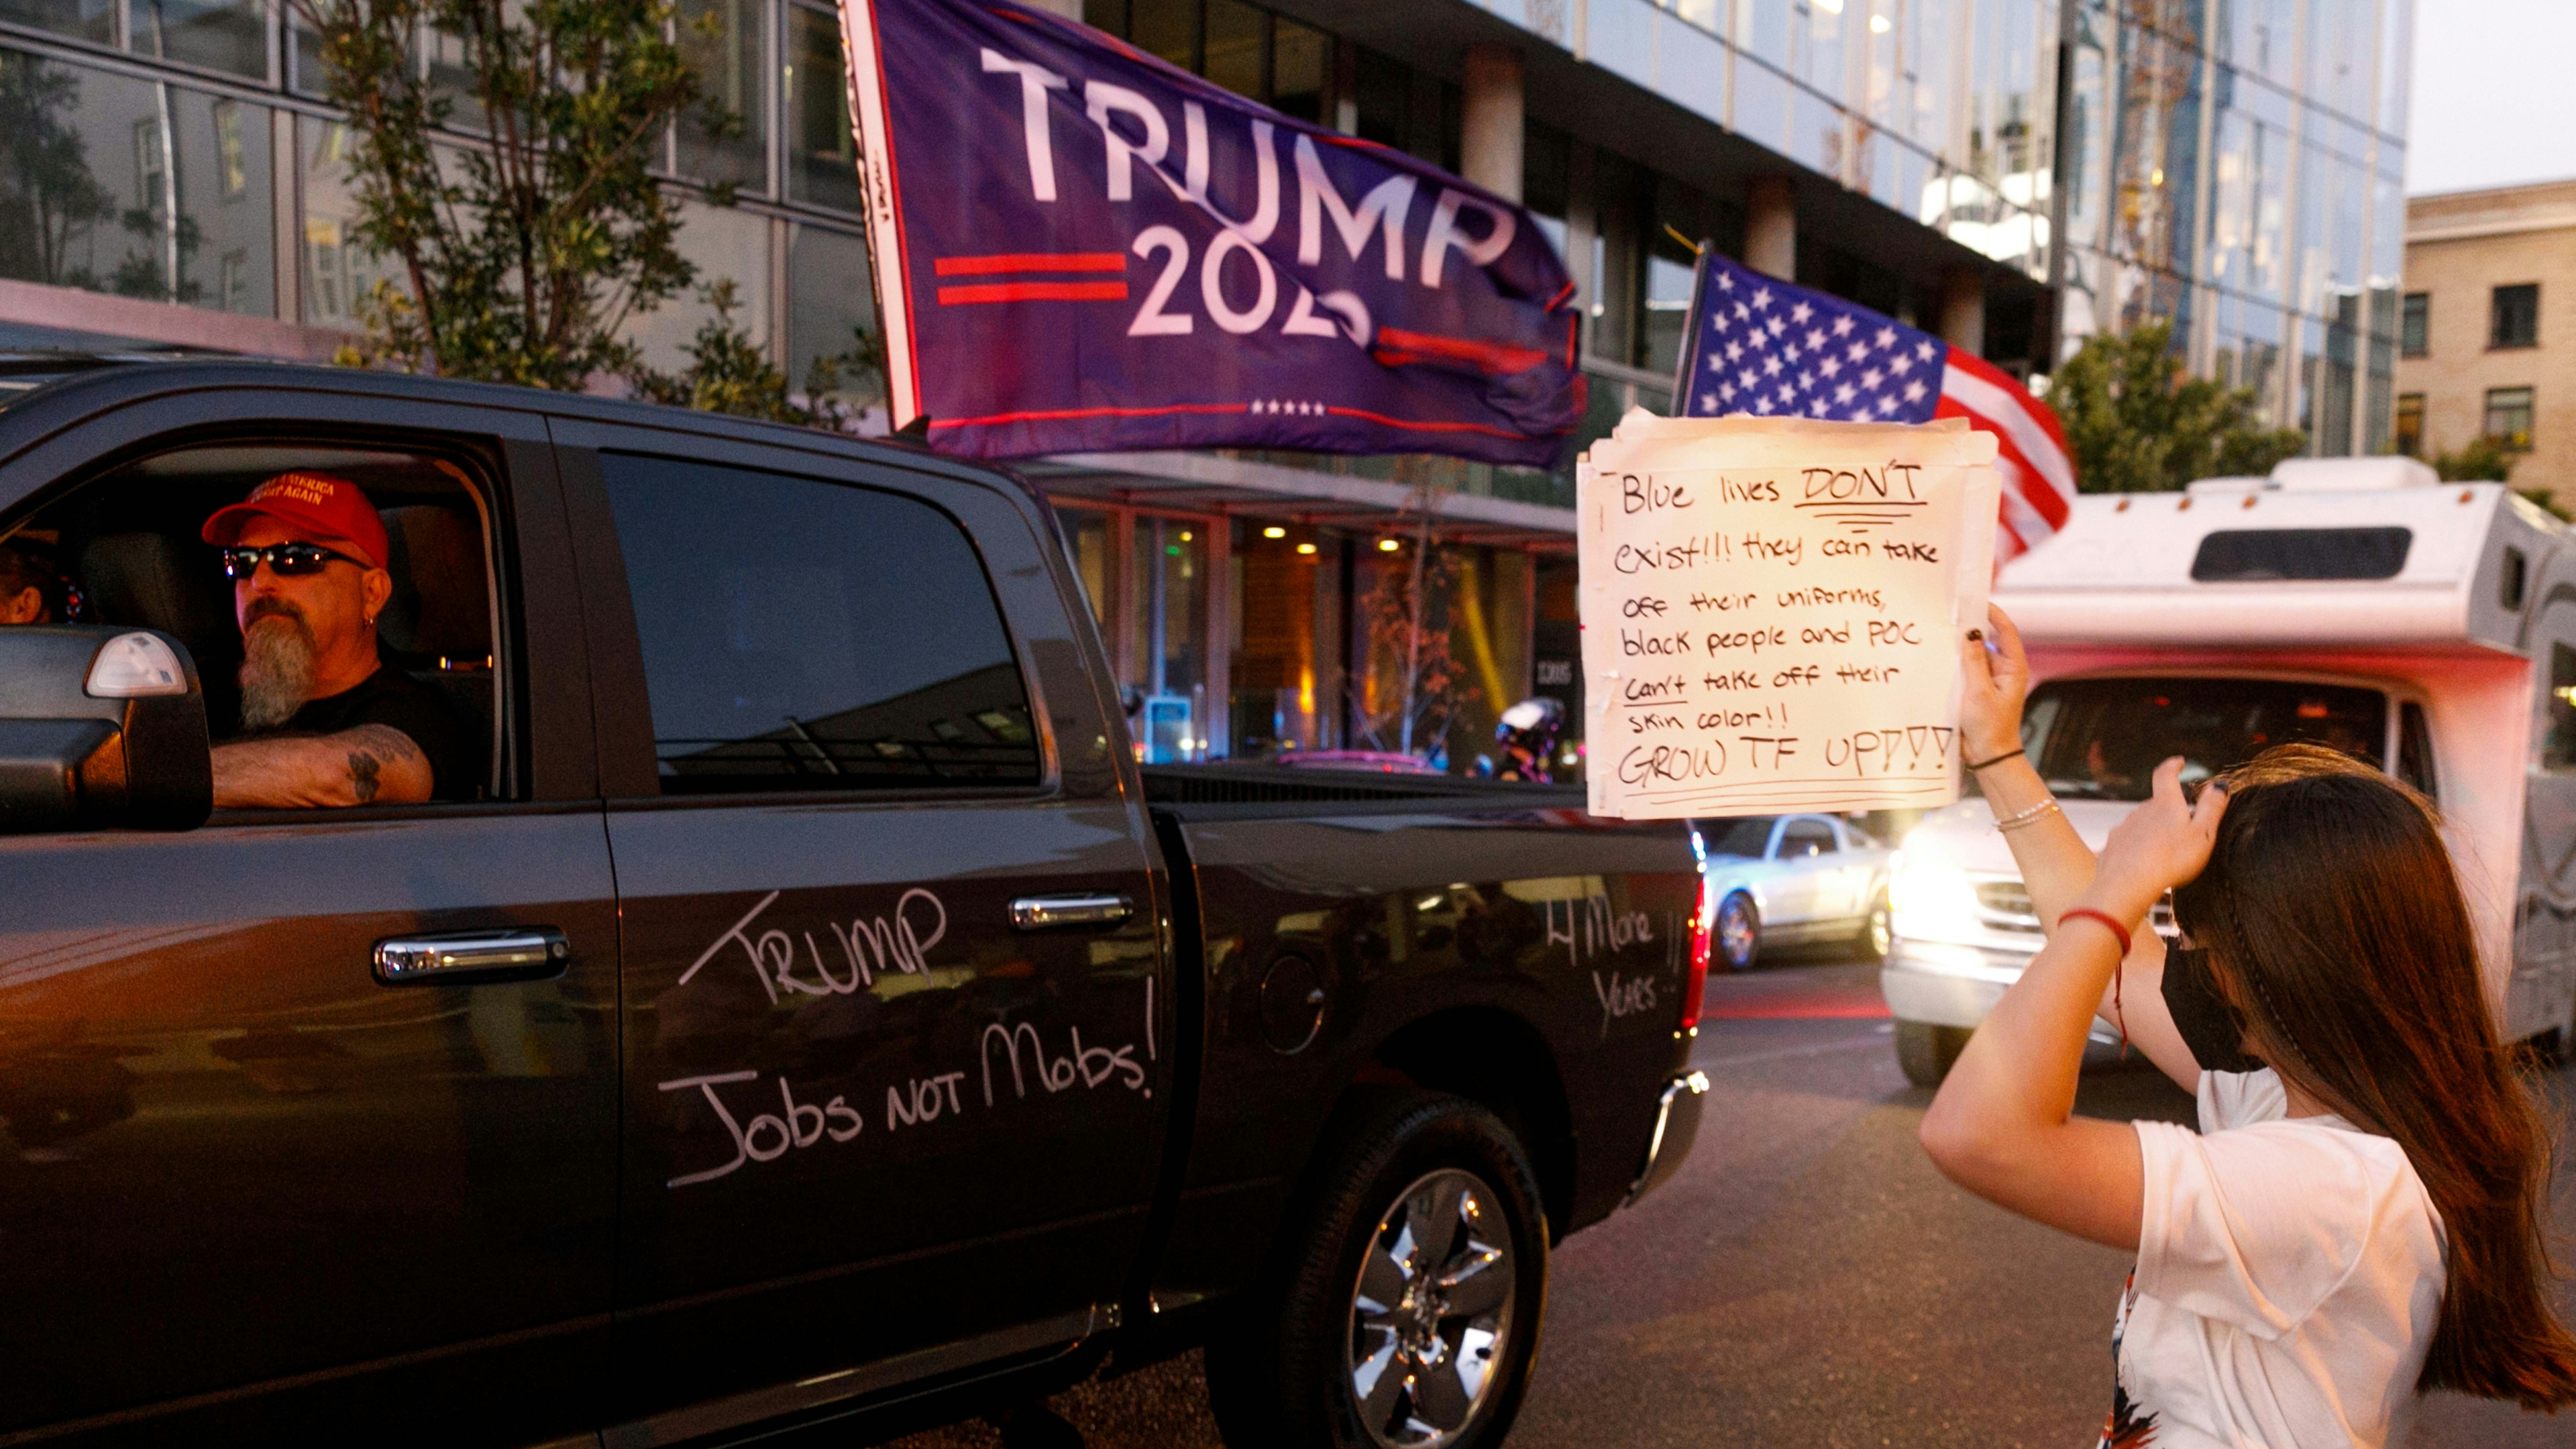 A BLM protester block Pickup trucks and cars full of flag-waving Donald Trump supporters